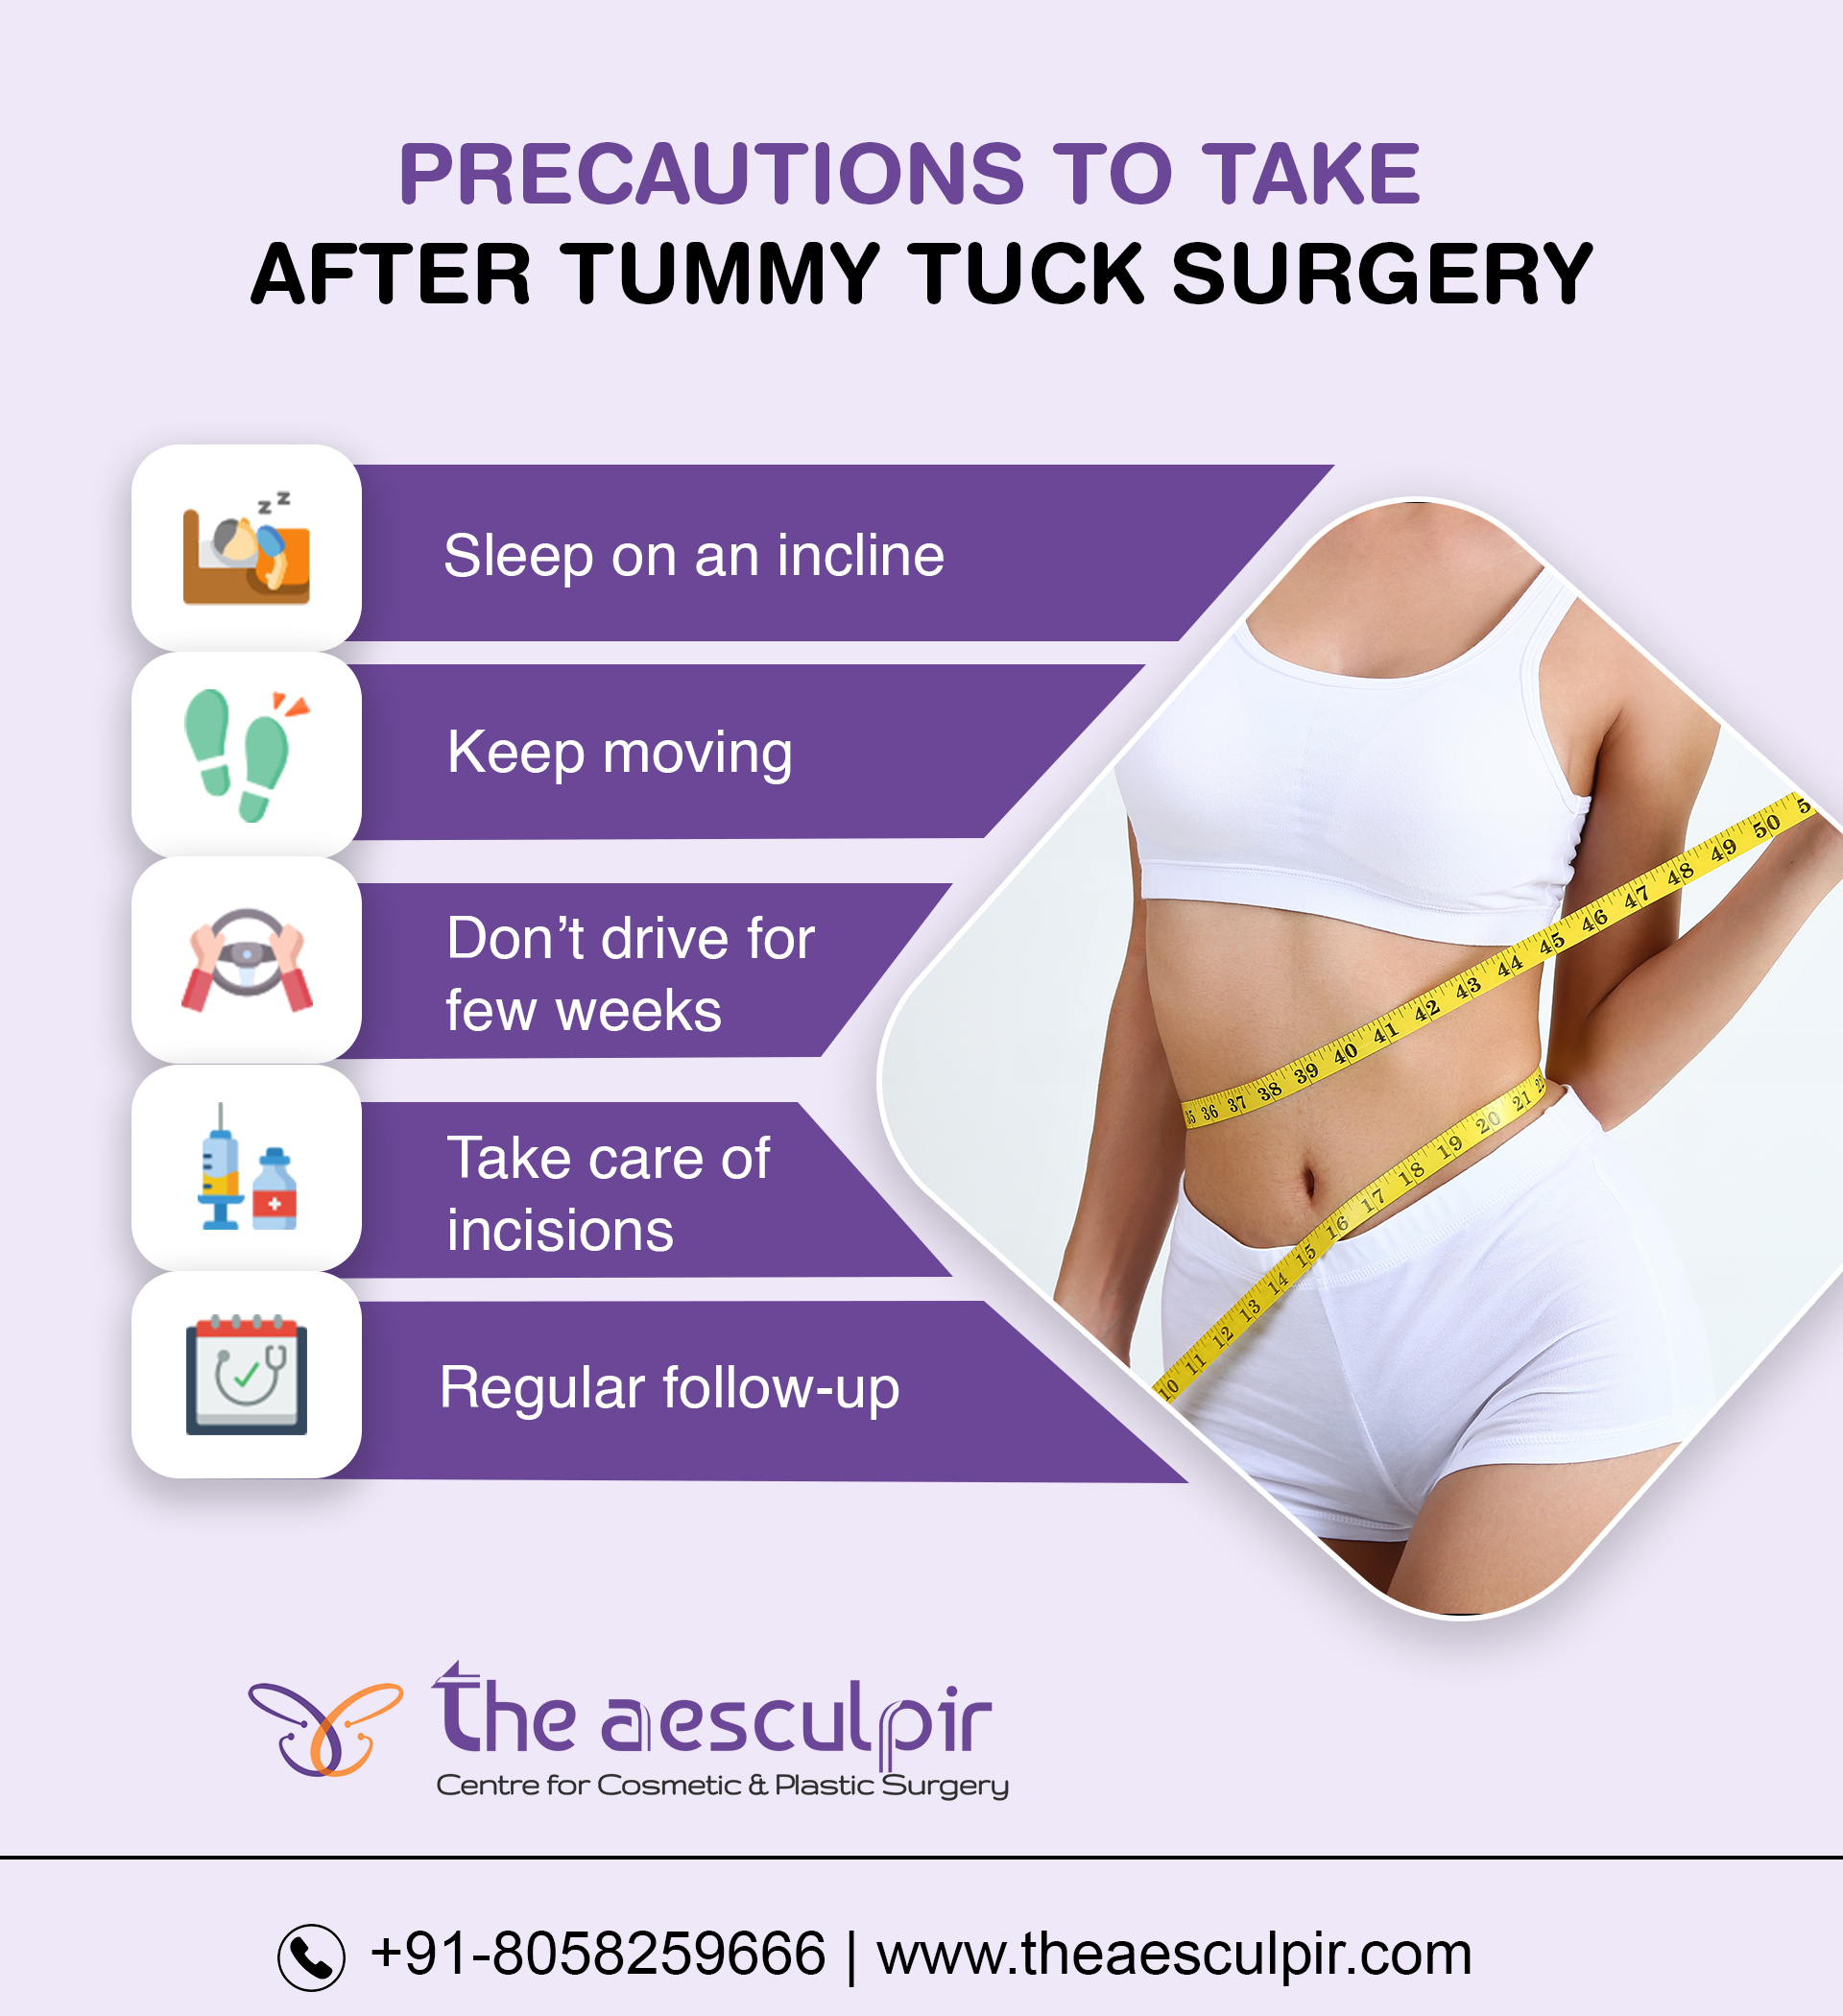 Healing process day by day tummy tuck recovery - kloterpreview